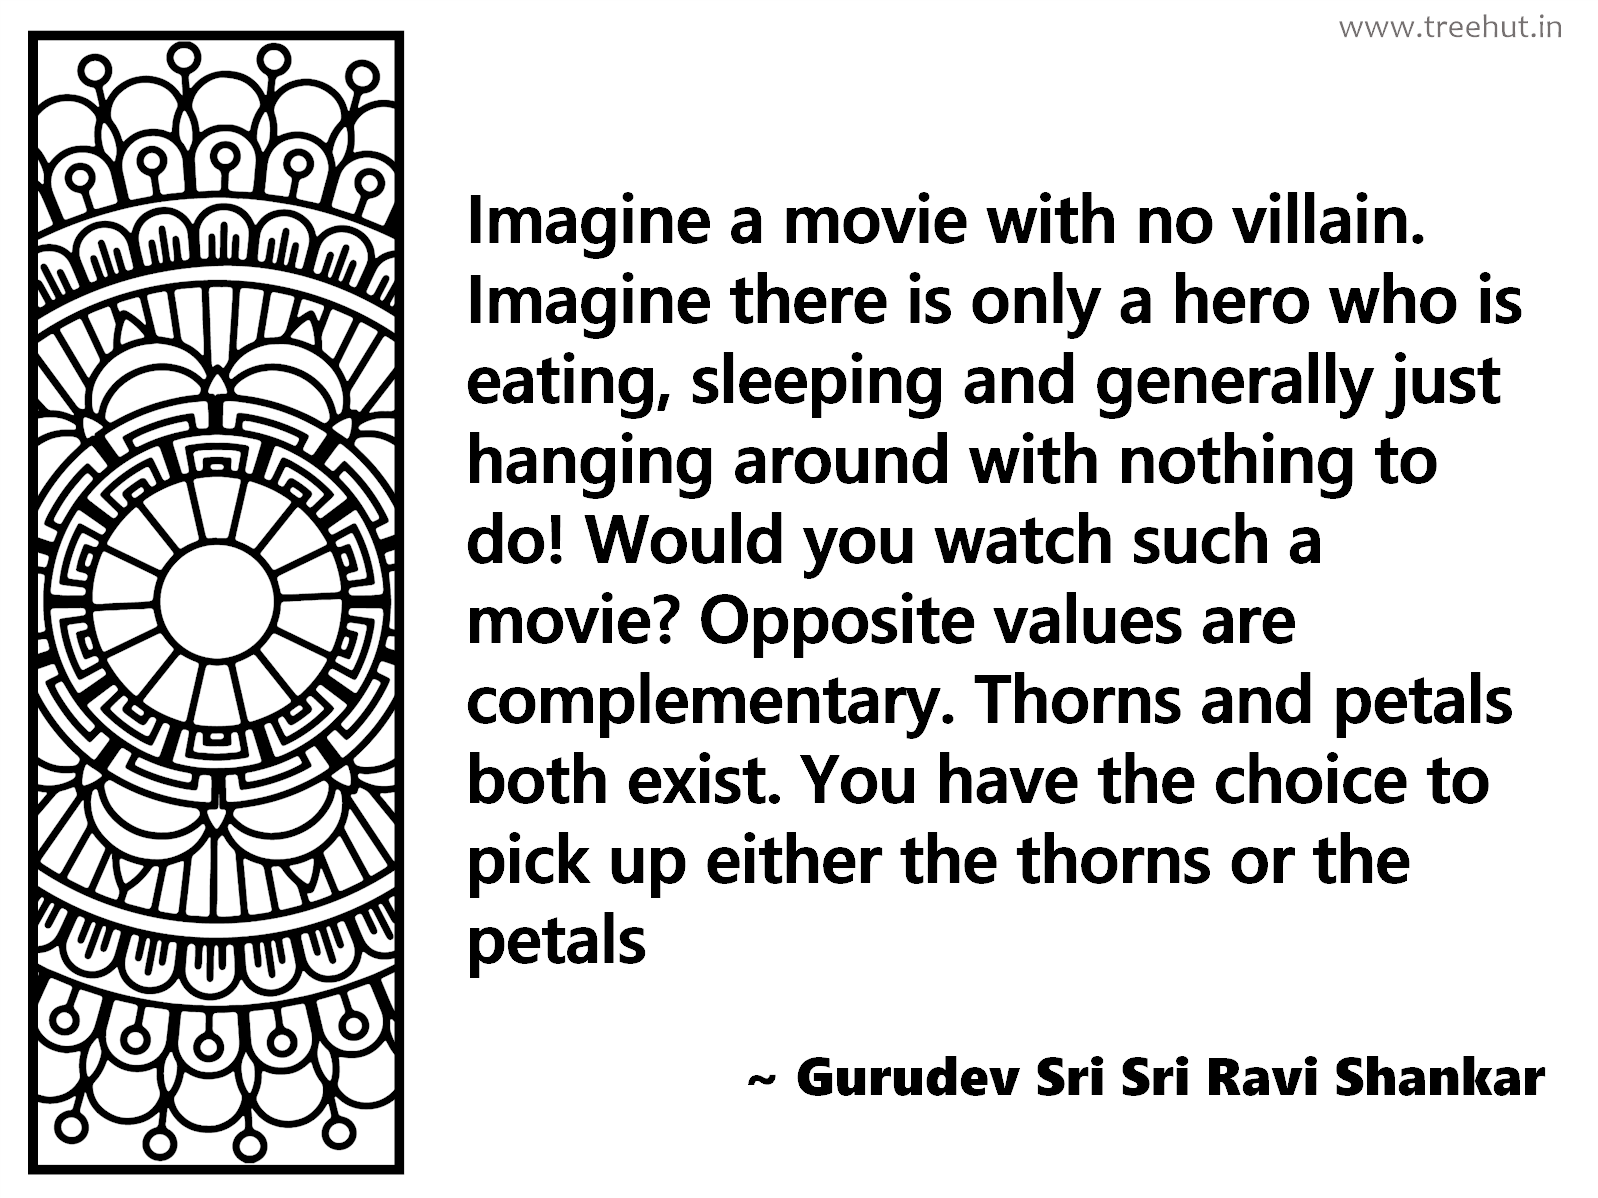 Imagine a movie with no villain. Imagine there is only a hero who is eating, sleeping and generally just hanging around with nothing to do! Would you watch such a movie? Opposite values are complementary. Thorns and petals both exist. You have the choice to pick up either the thorns or the petals Inspirational Quote by Gurudev Sri Sri Ravi Shankar, coloring pages